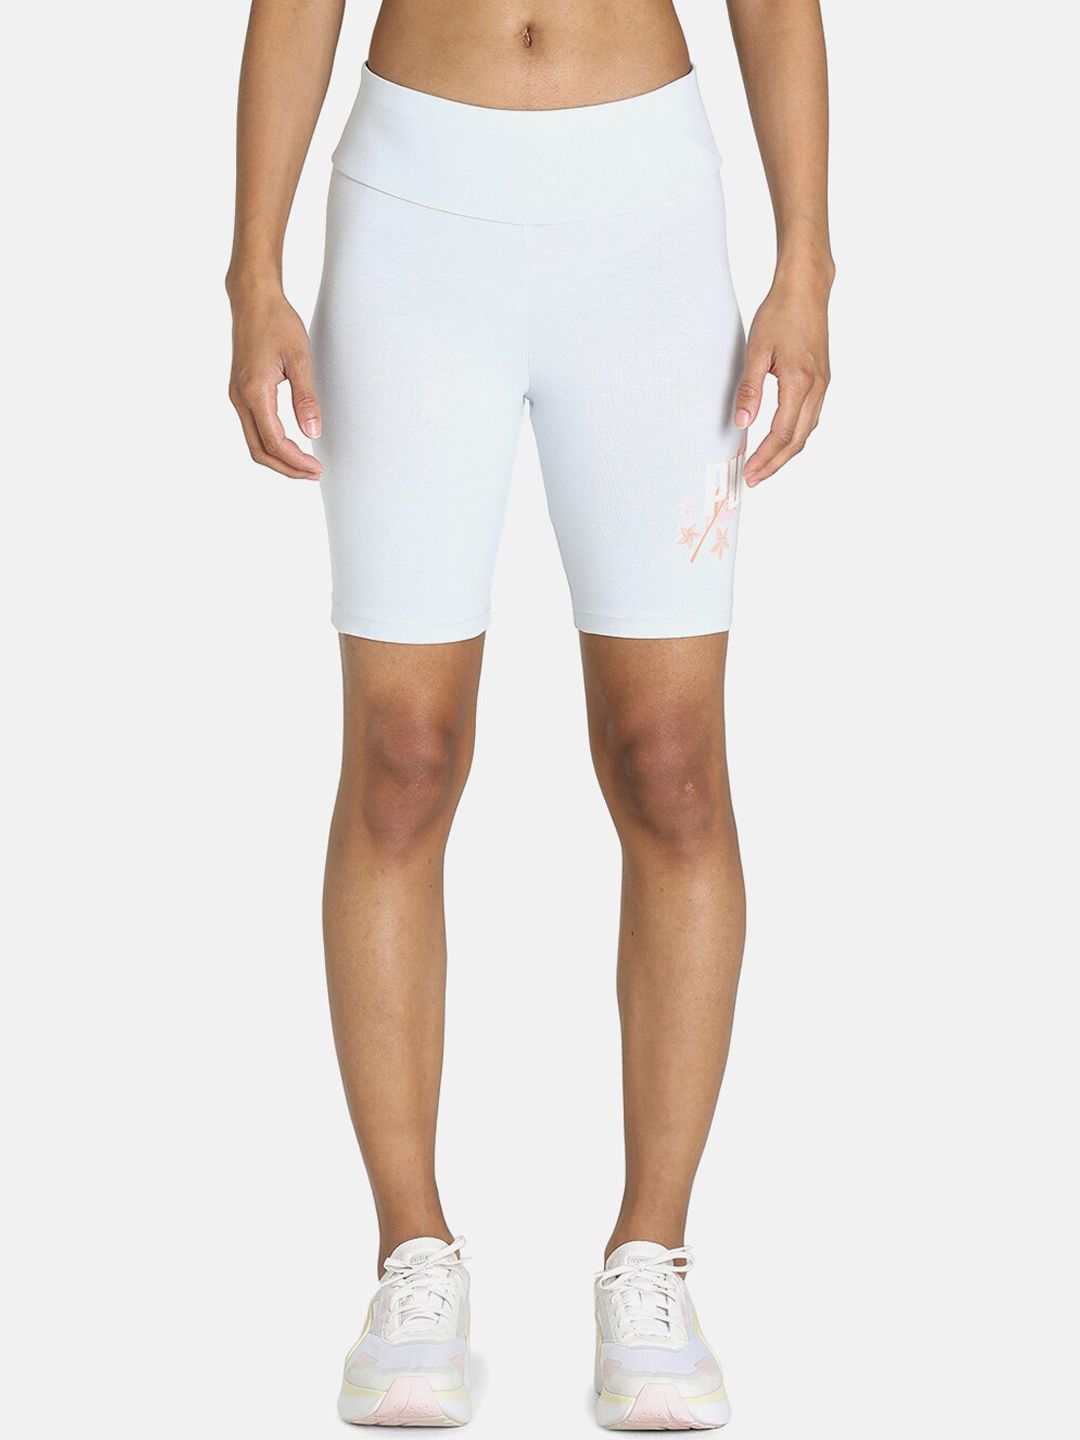 Puma Women White Cotton Solid Shorts Price in India